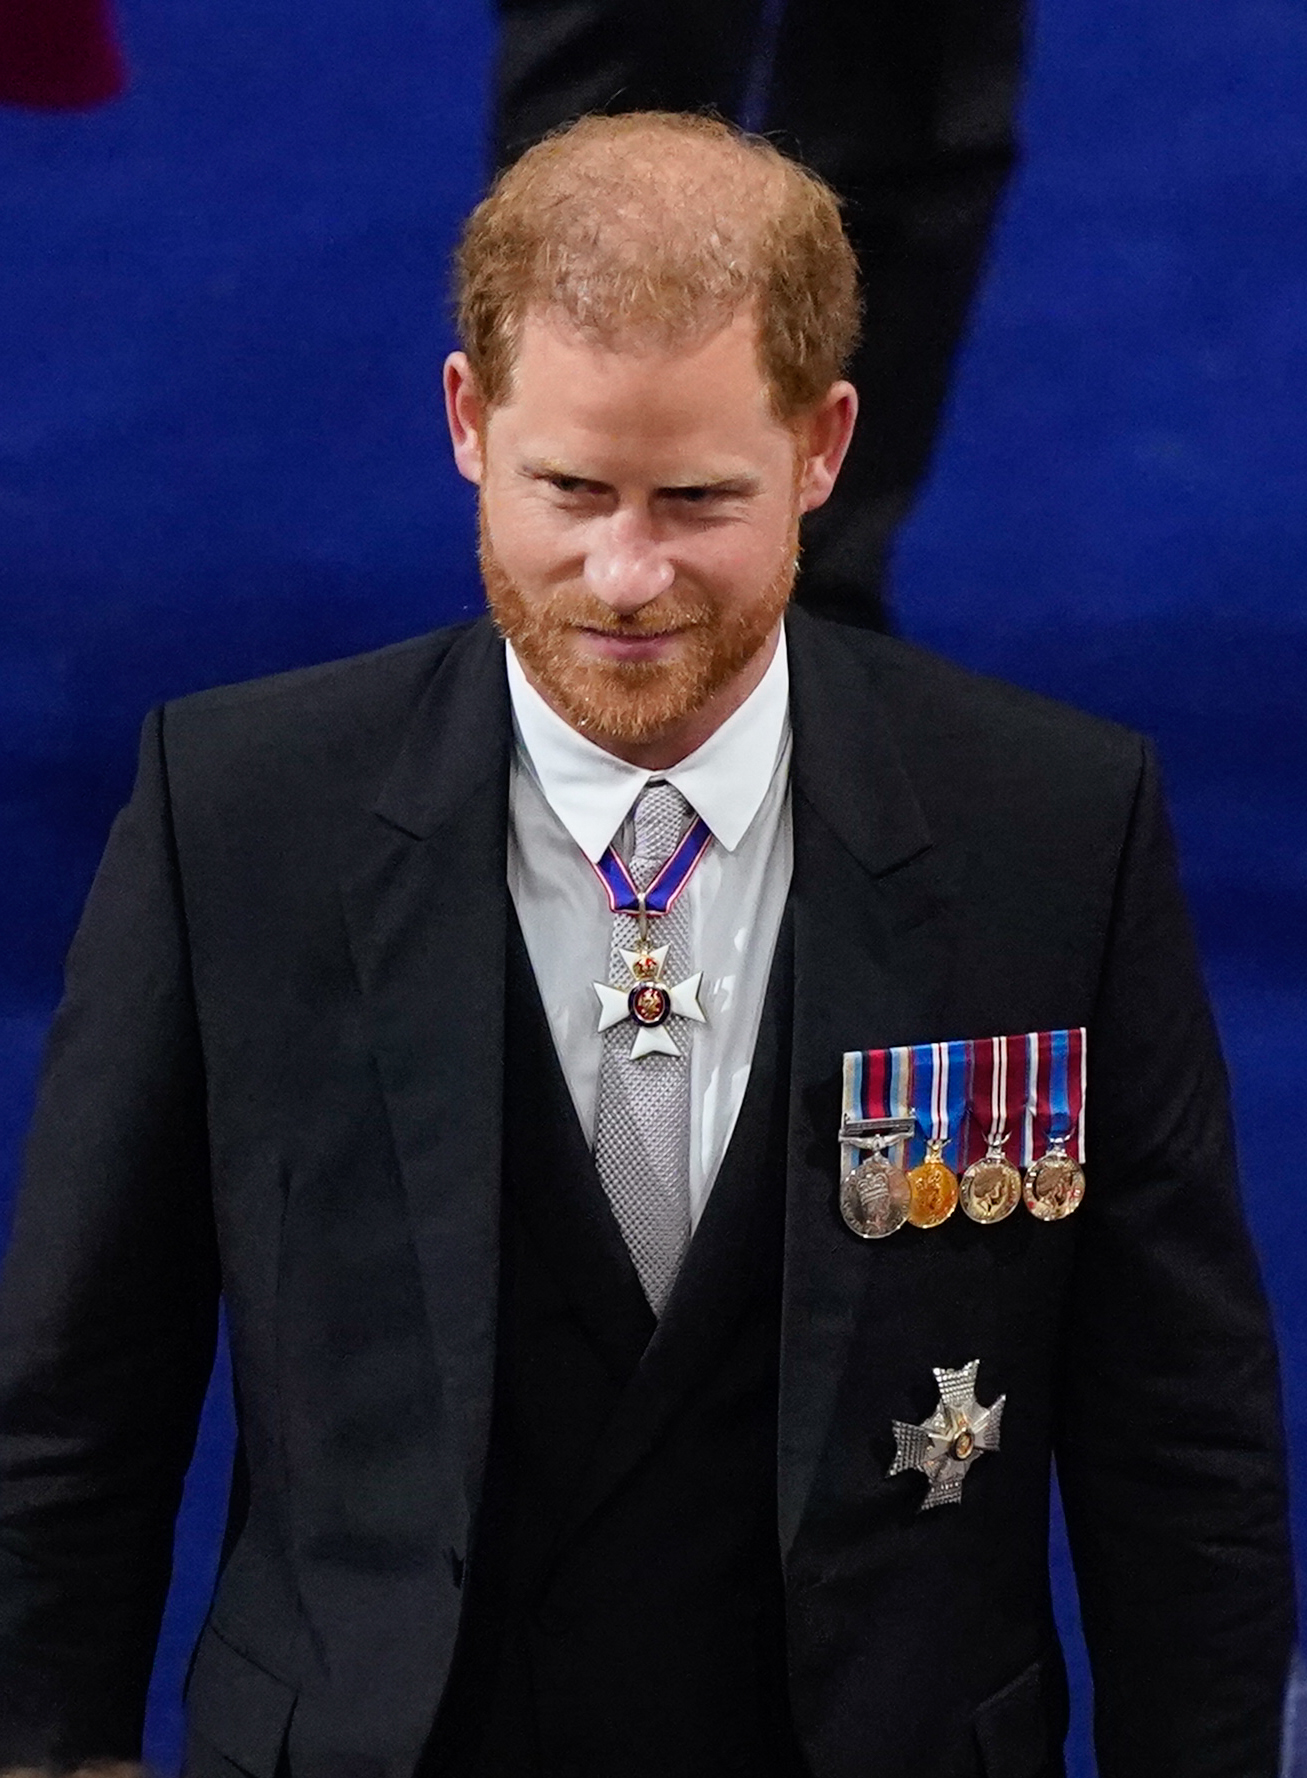 Prince Harry at the coronation ceremony of King Charles III and Queen Camilla in London, England on May 6, 2023 | Source: Getty Images